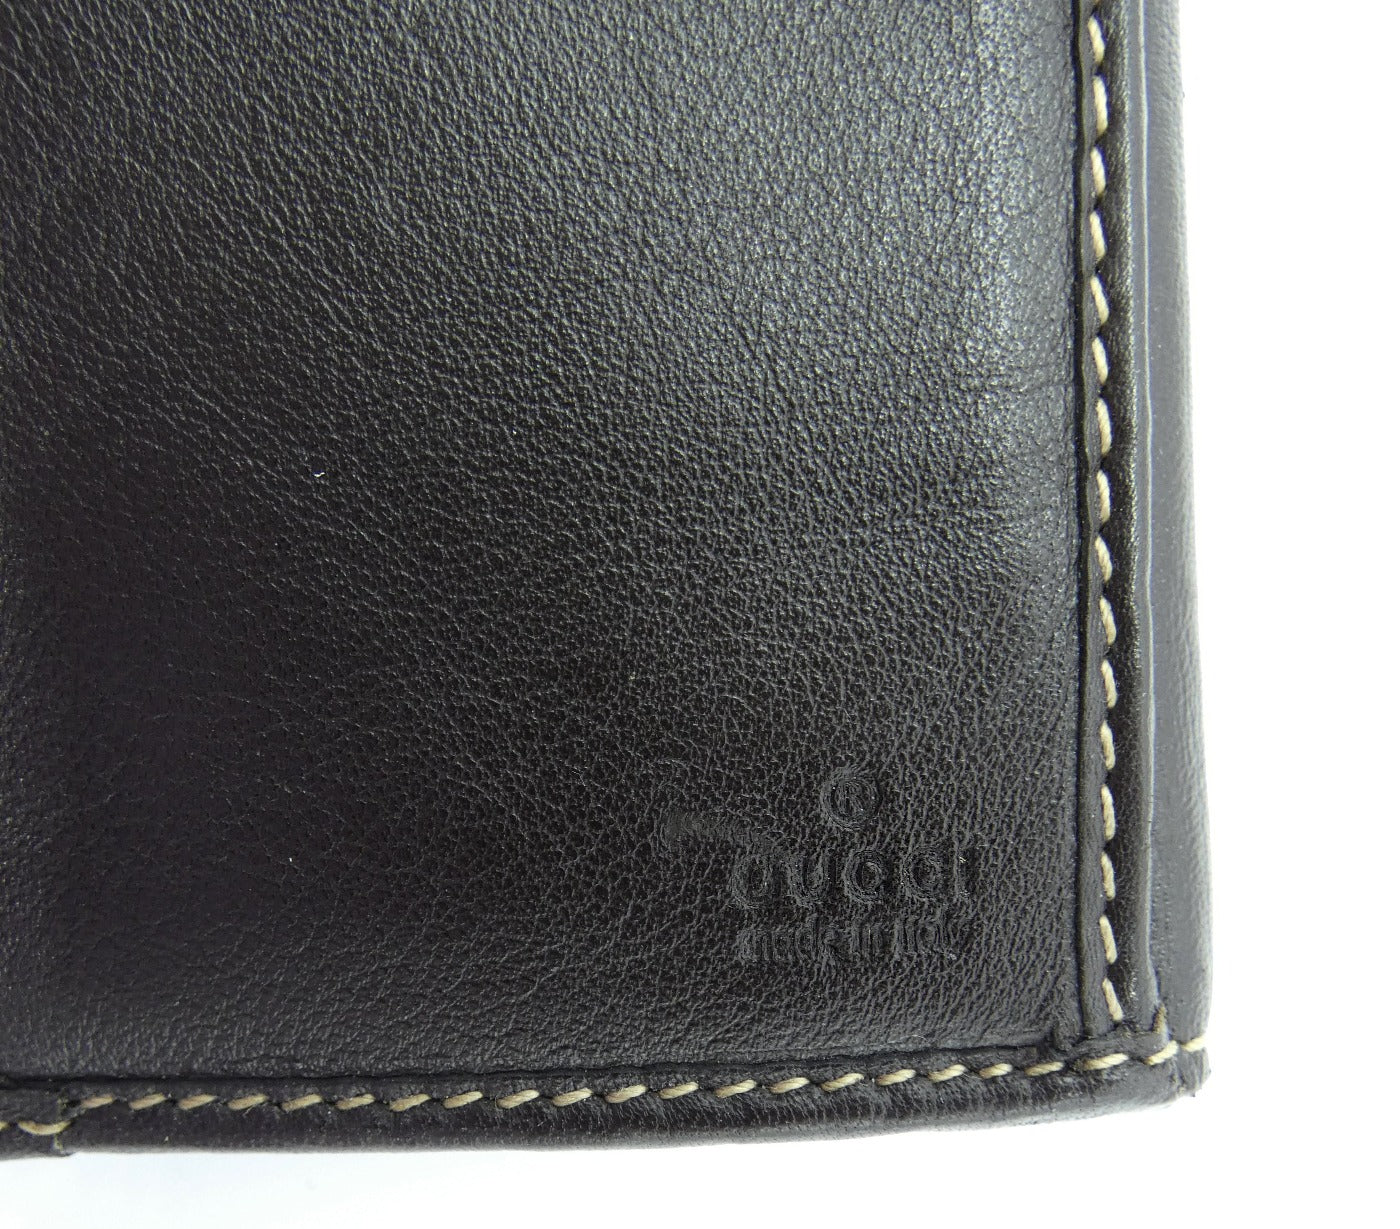 Gucci Double G Logo Guccisima Canvas Wallet Black Large NEW